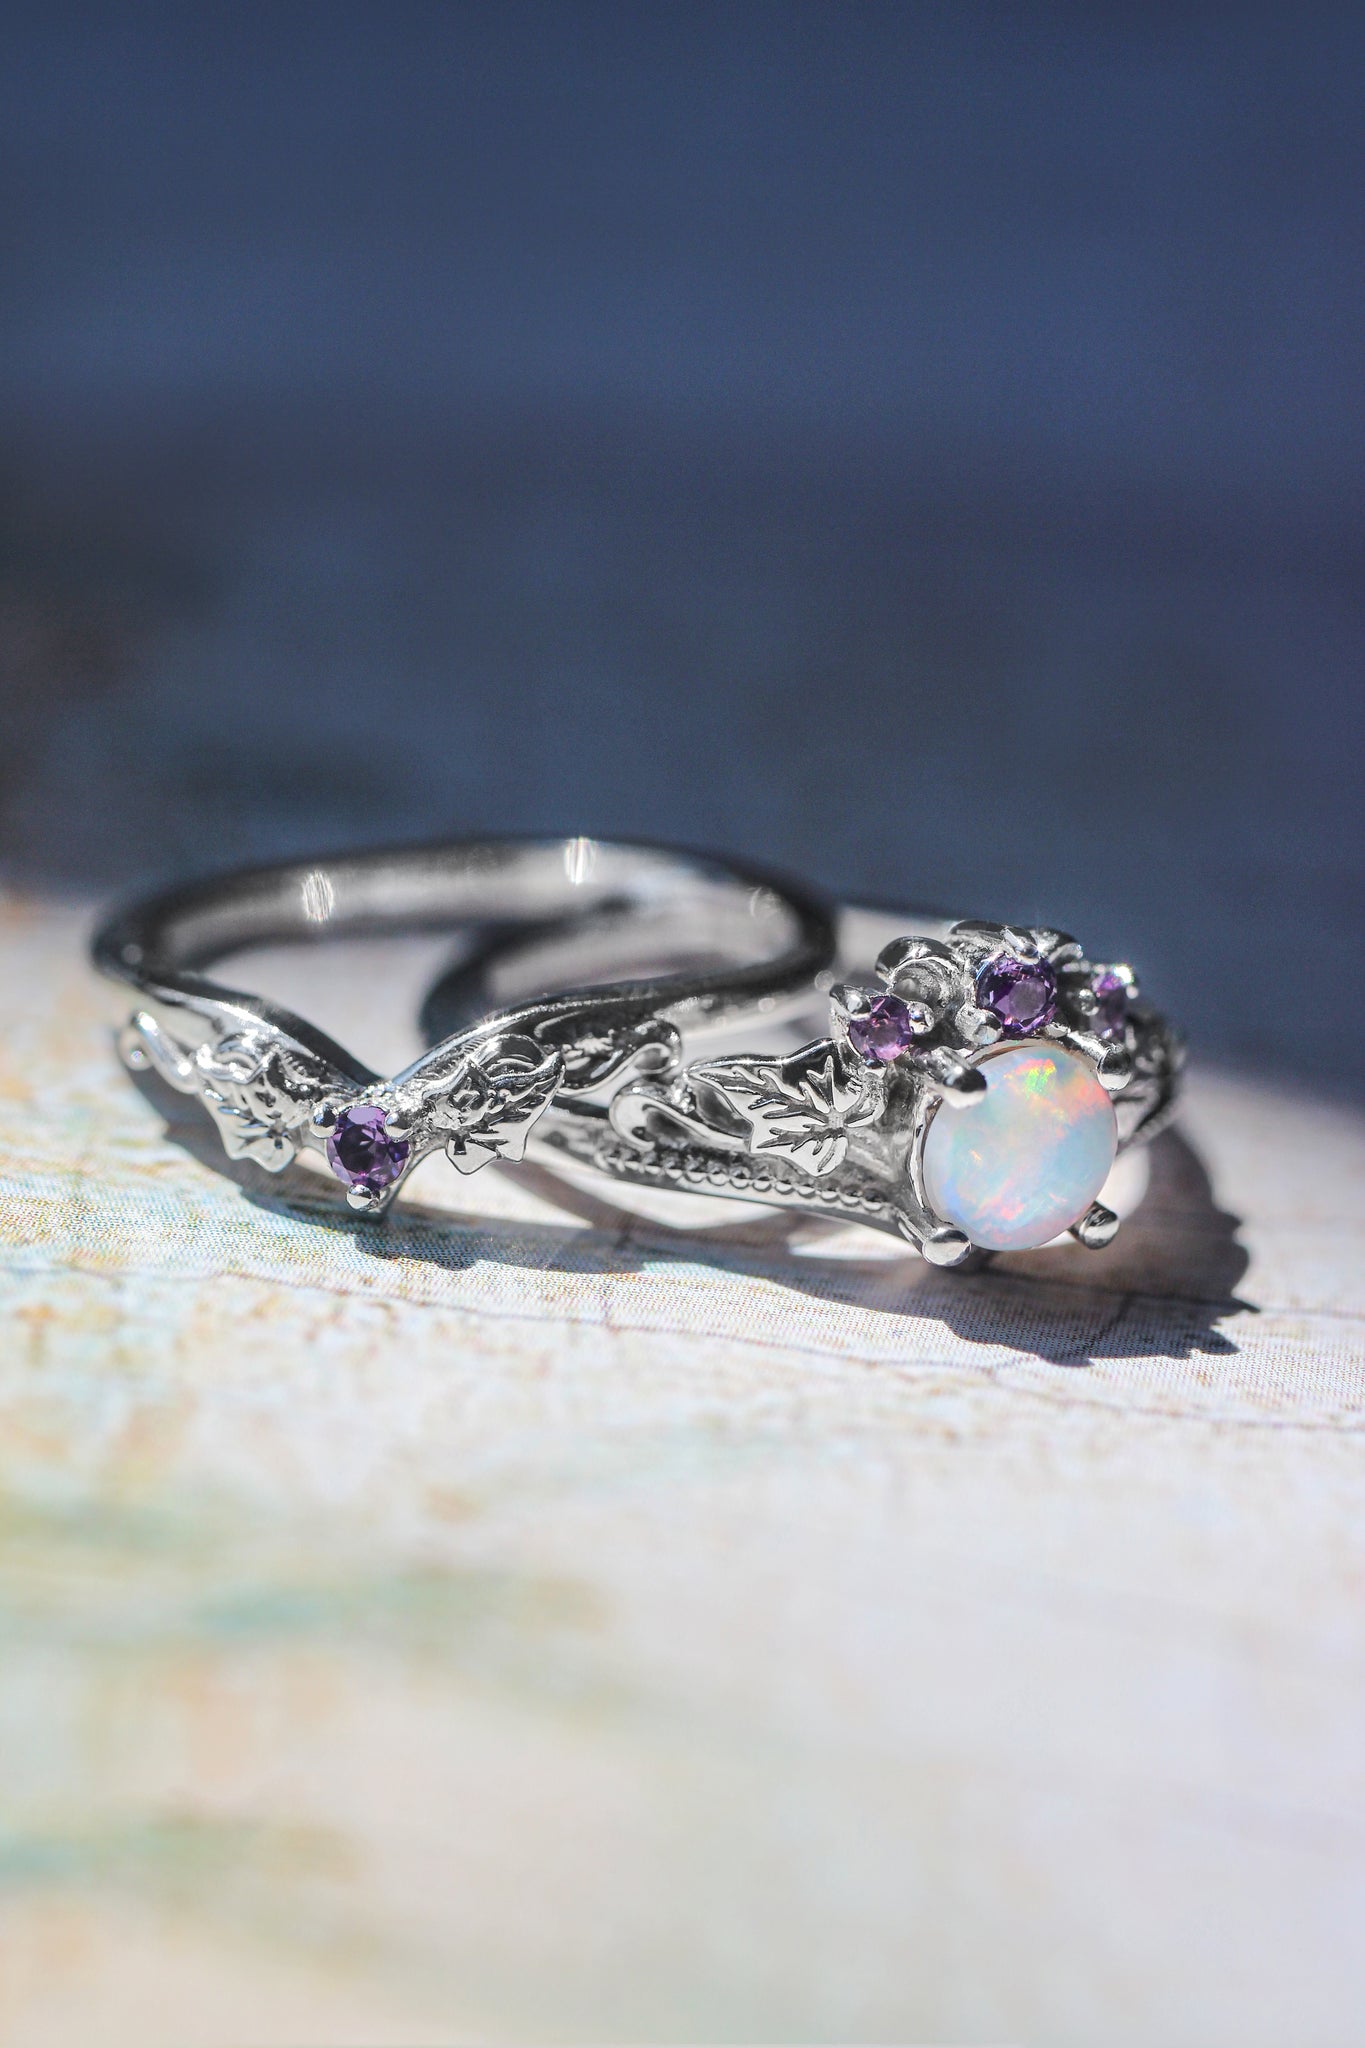 Bridal ring set with opal and amethysts / Ariadne - Eden Garden Jewelry™